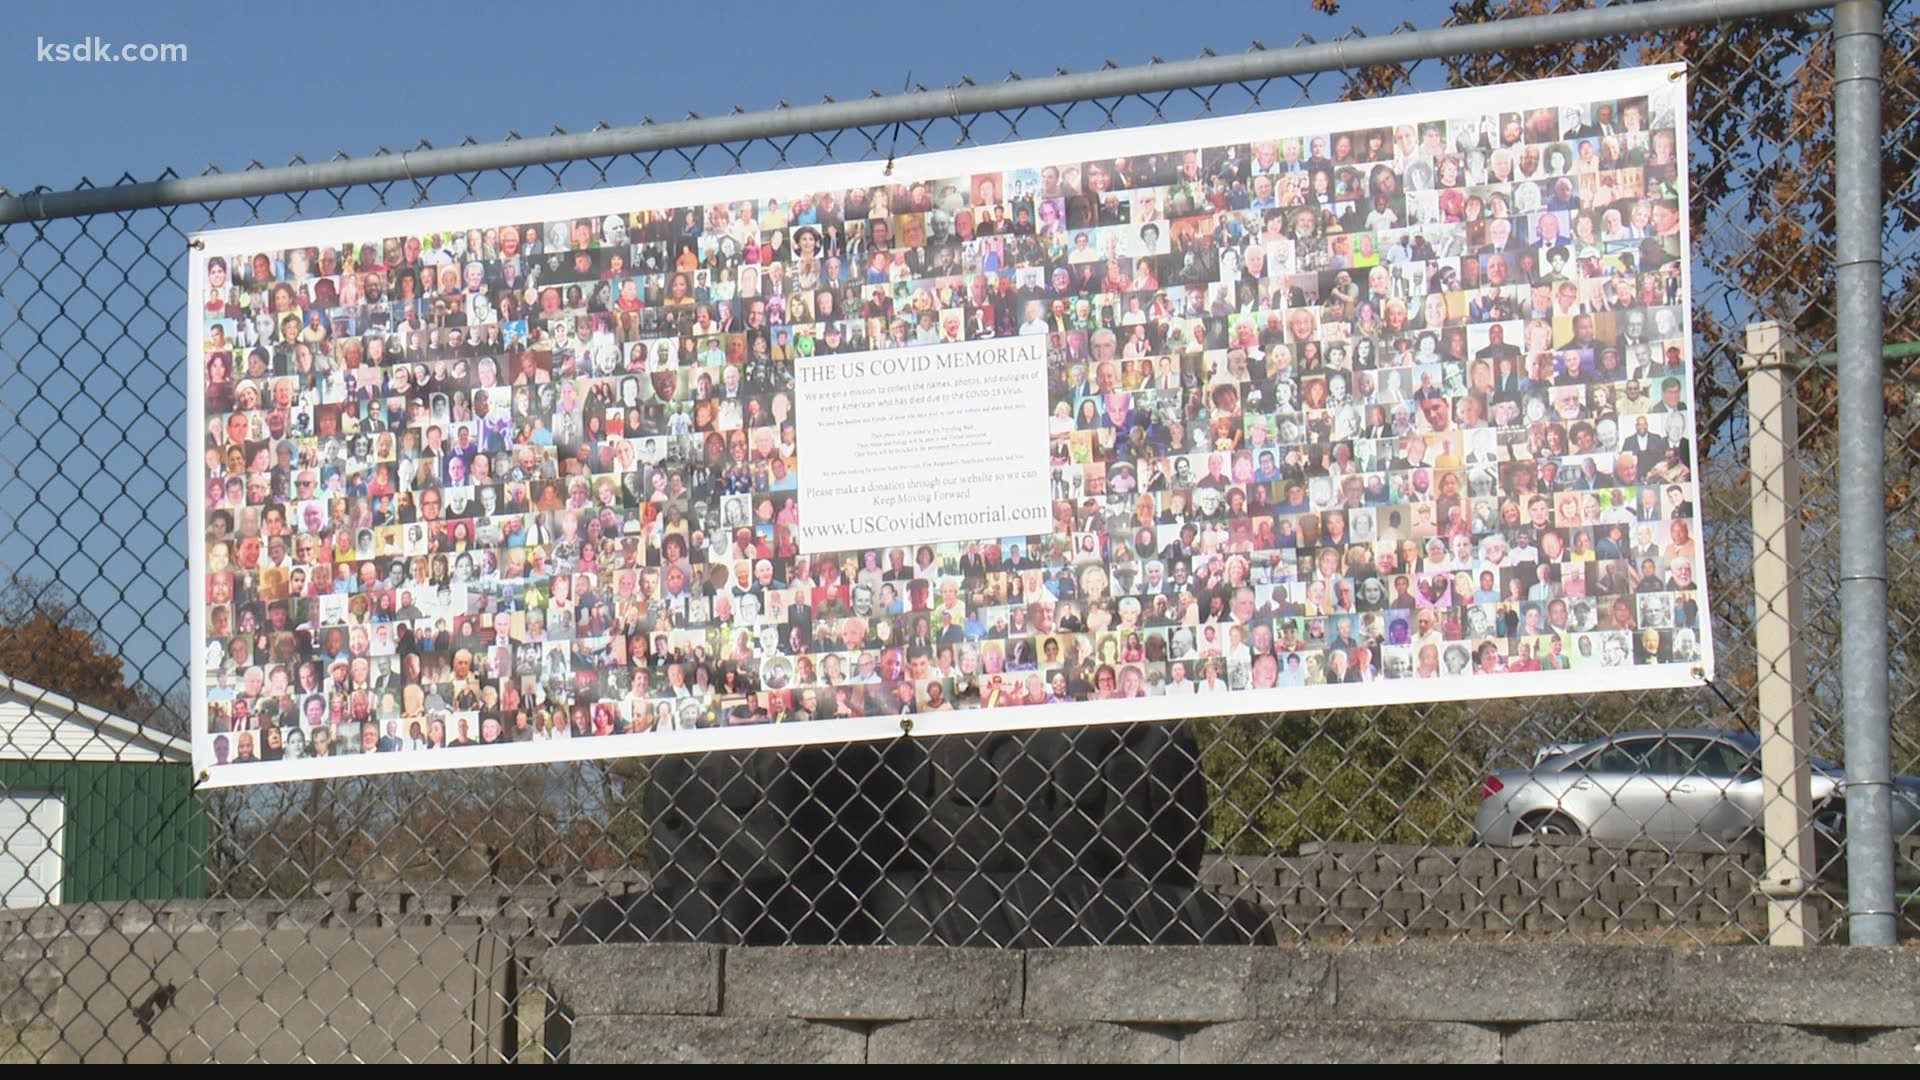 Each three-by-eight-foot banner contains photos or hearts representing every American lost to the pandemic